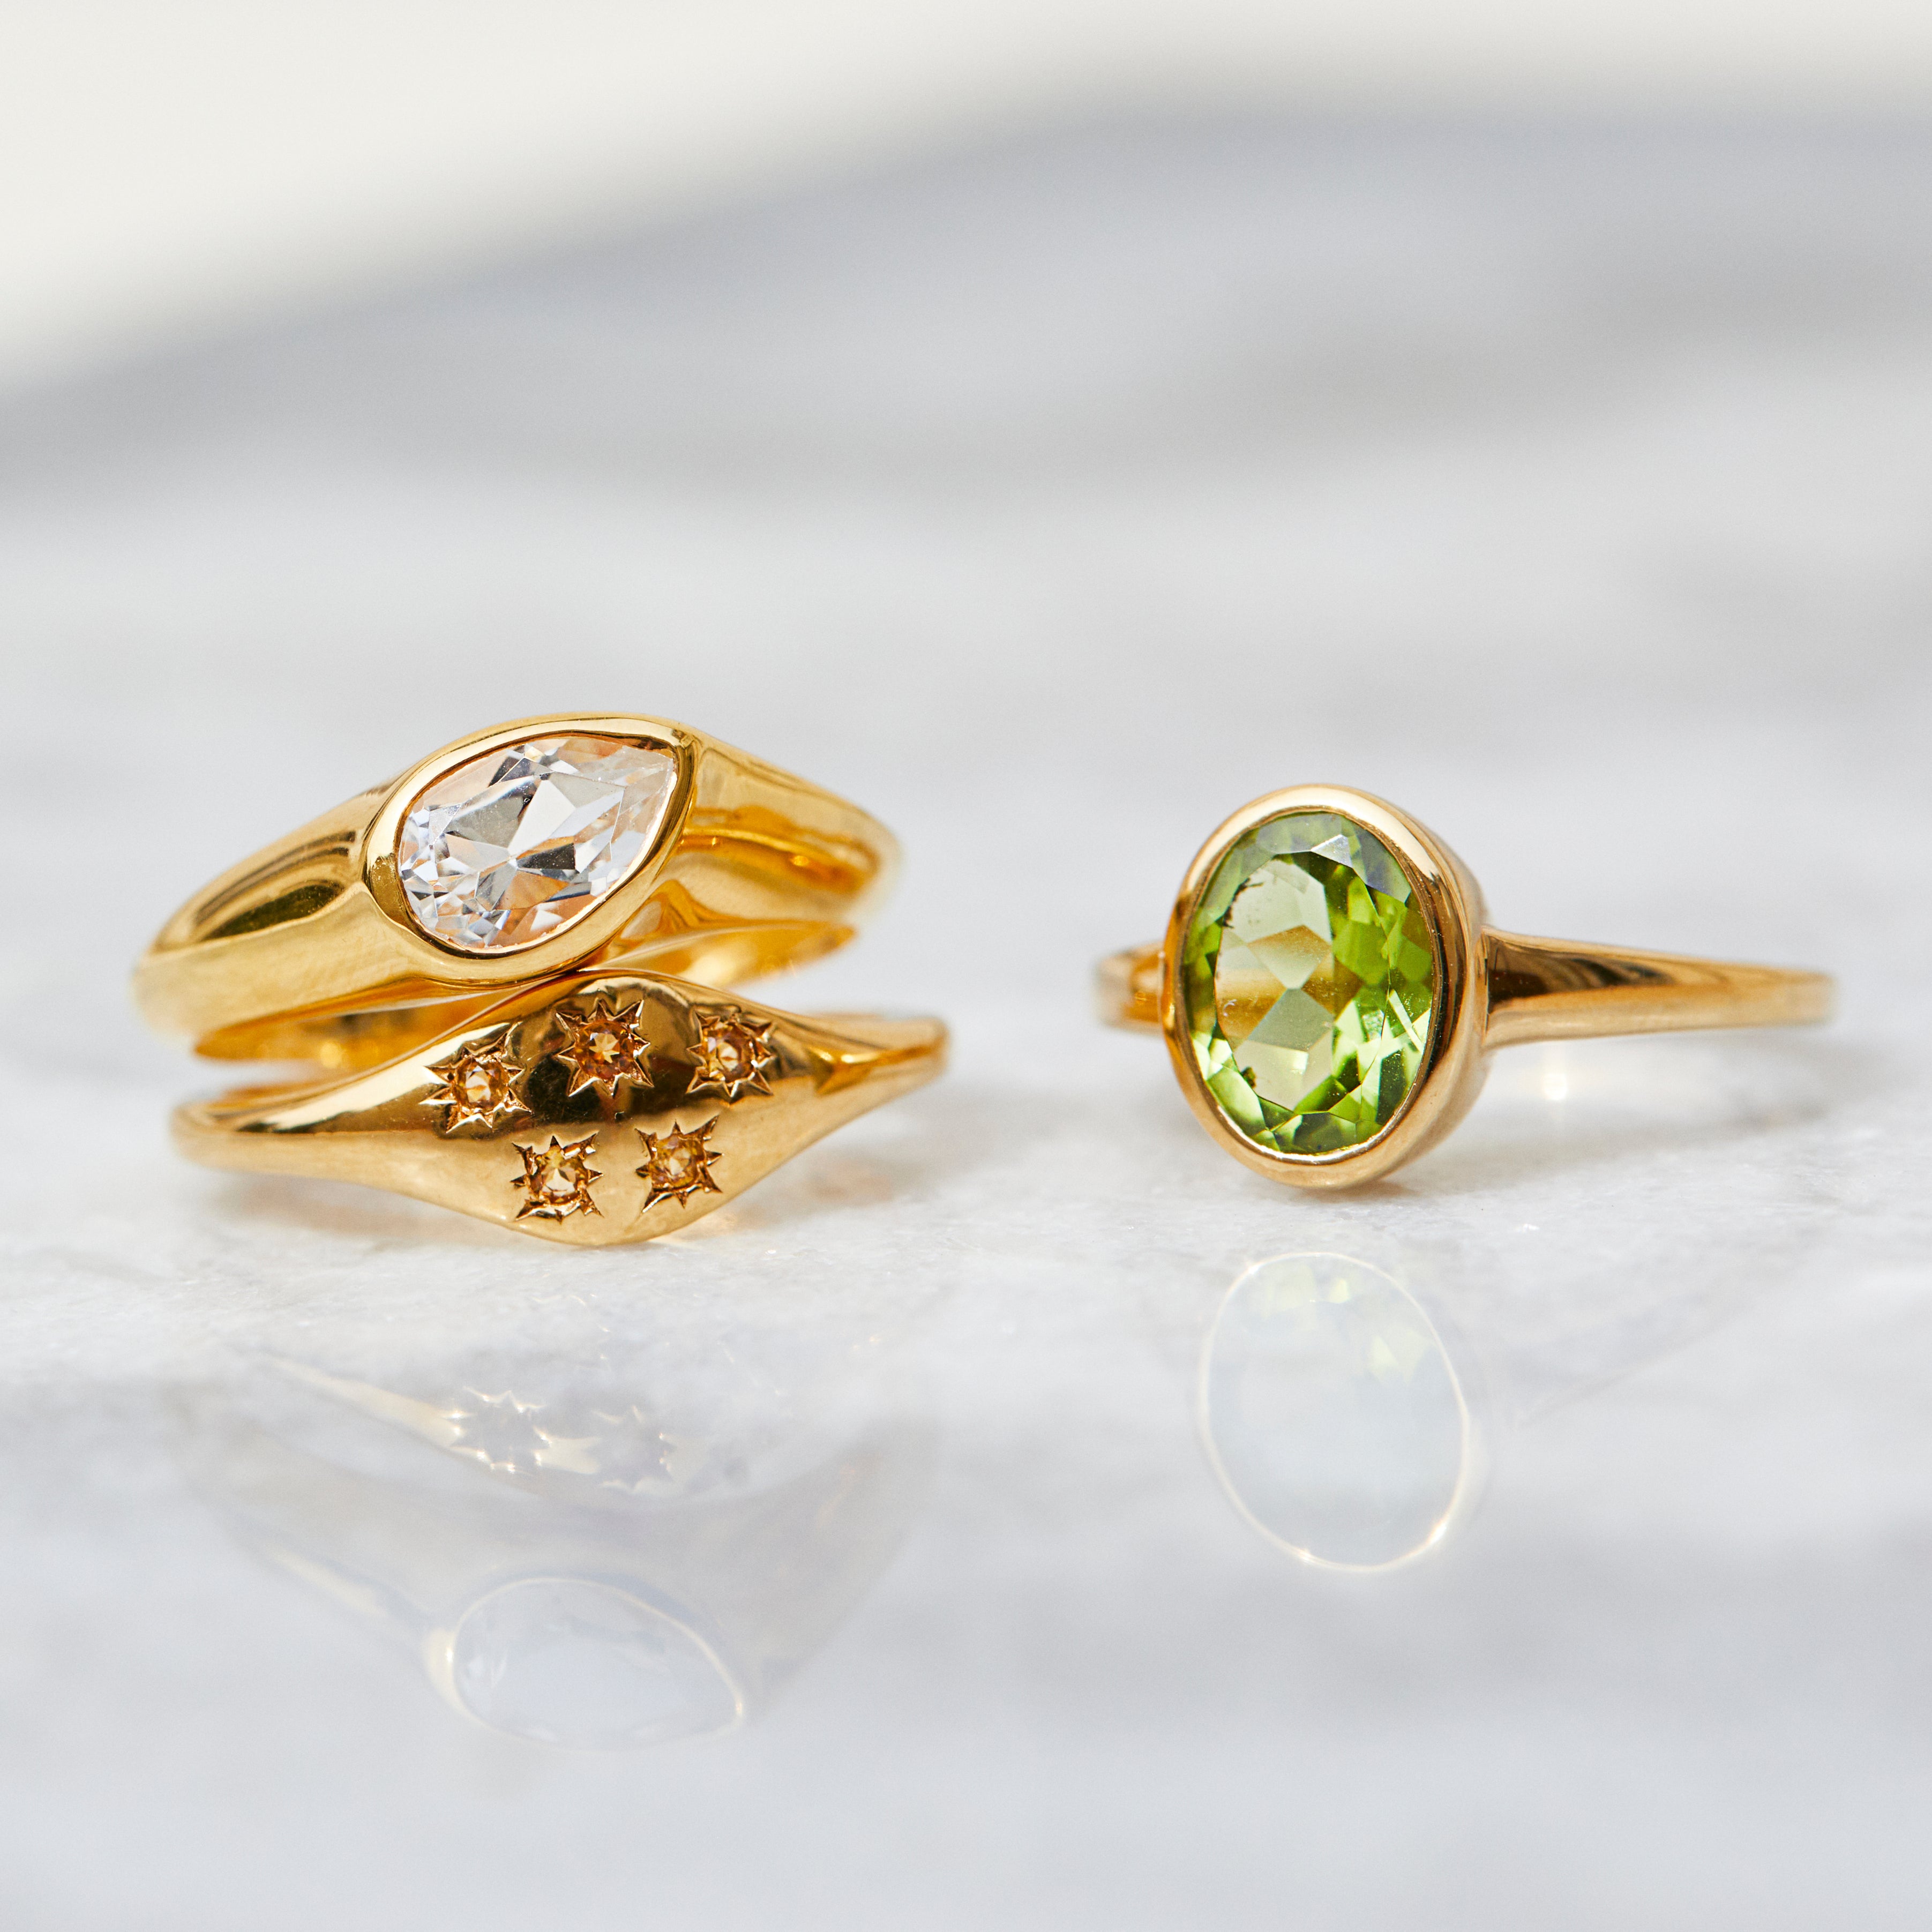 zoe sugg intentions courage peridot ring in gold